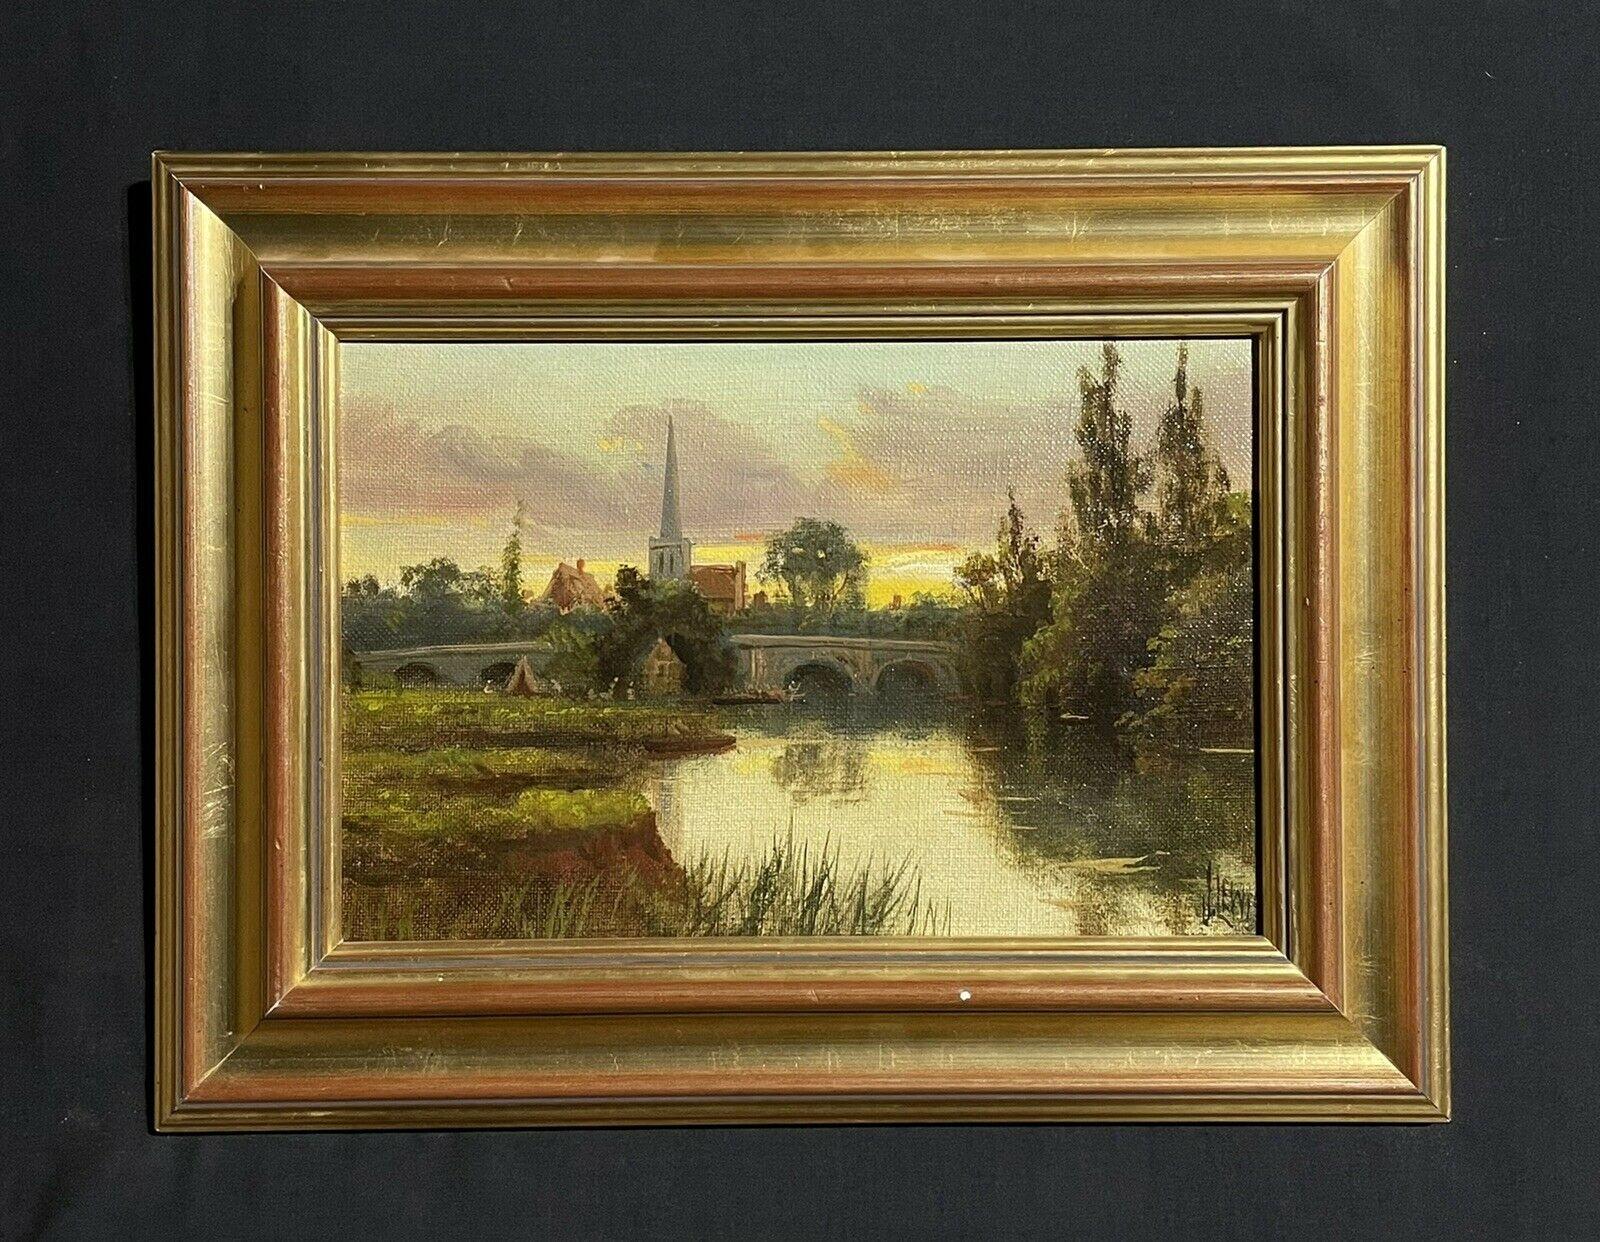 Antique English Signed Oil - Sunset over the River Thames fields and church - Painting by James Lewis